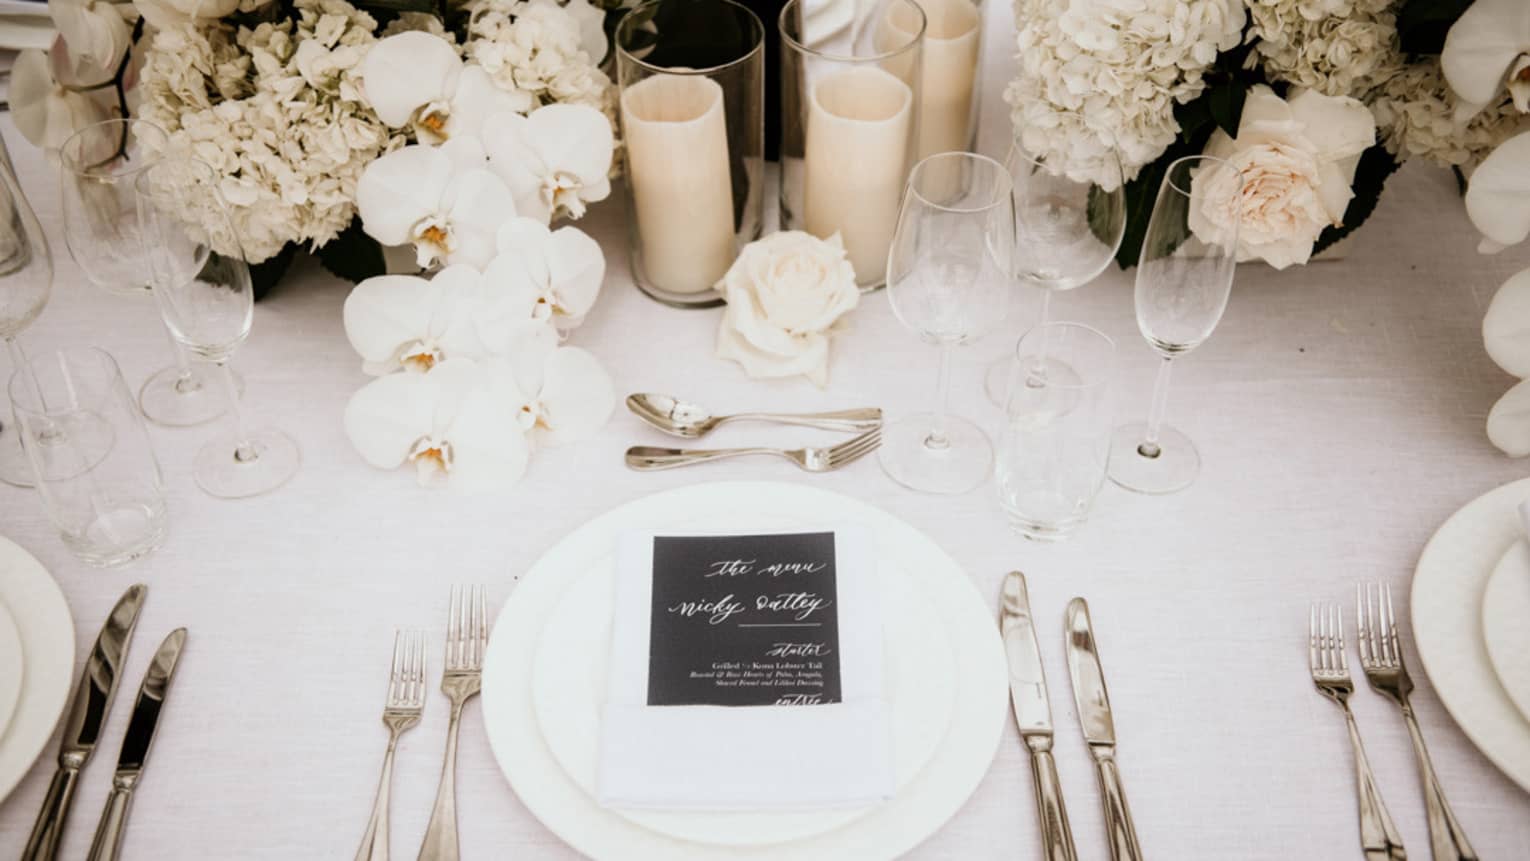 Wedding table setting with white flowers and candles, menu on white napkin and plates